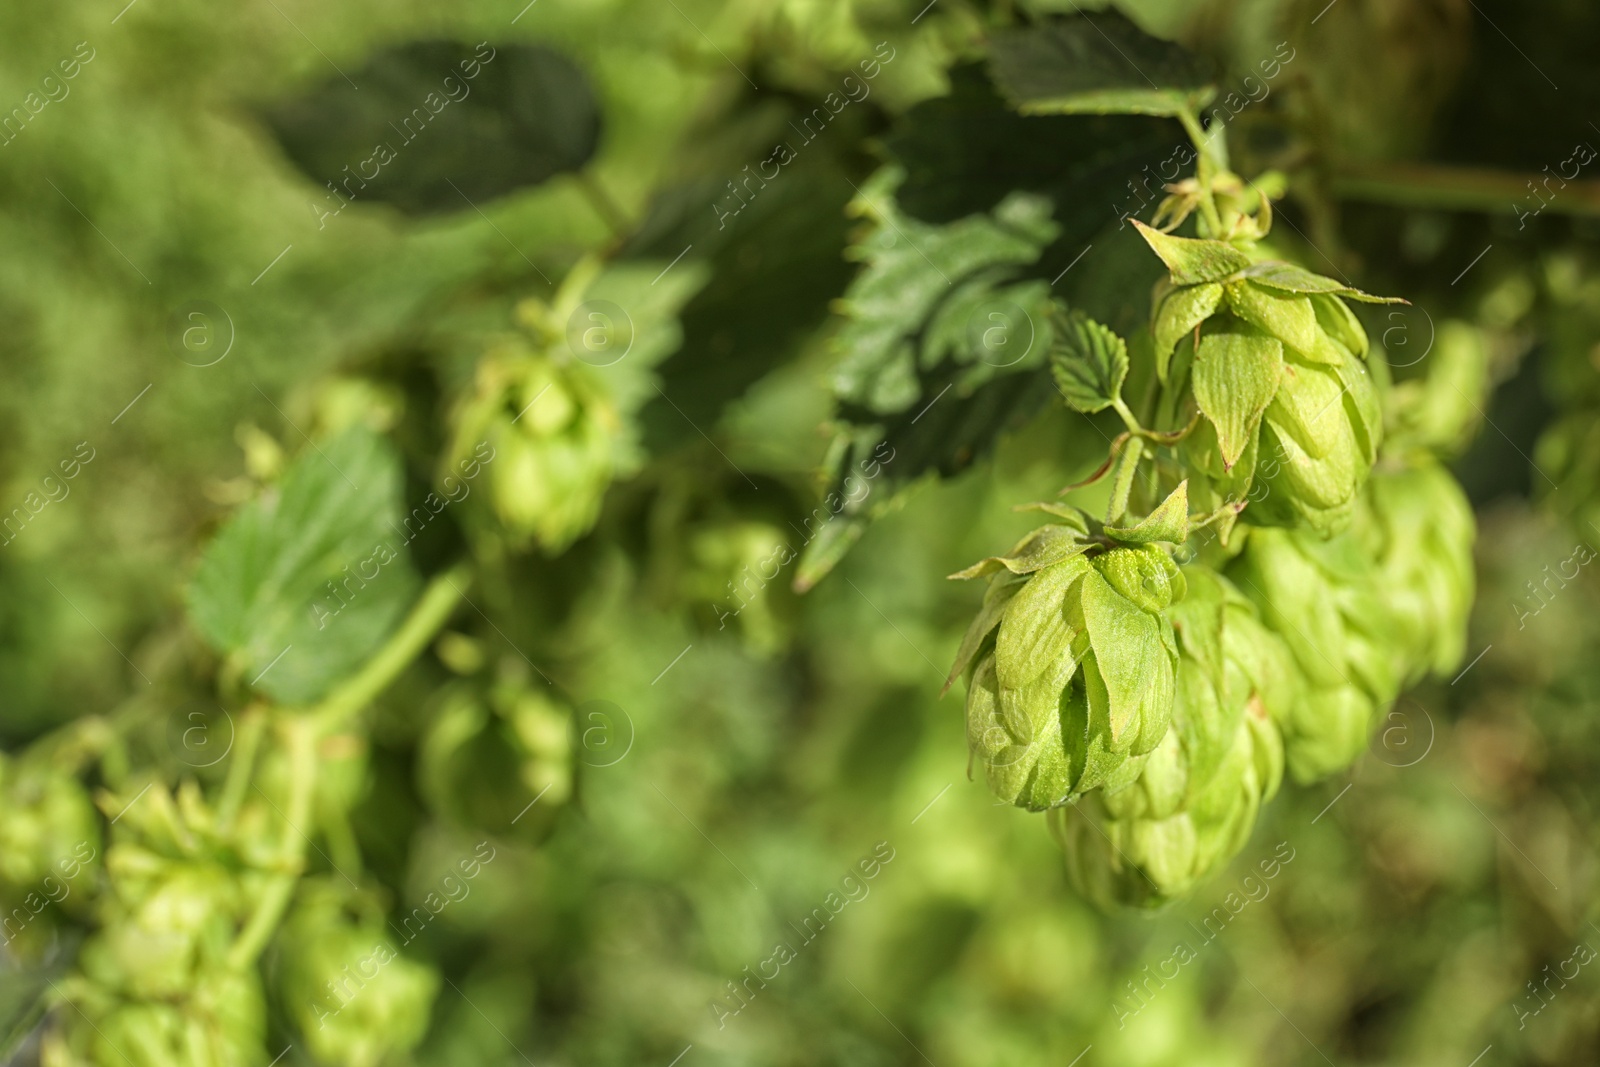 Photo of Fresh green hops on bine against blurred background. Beer production